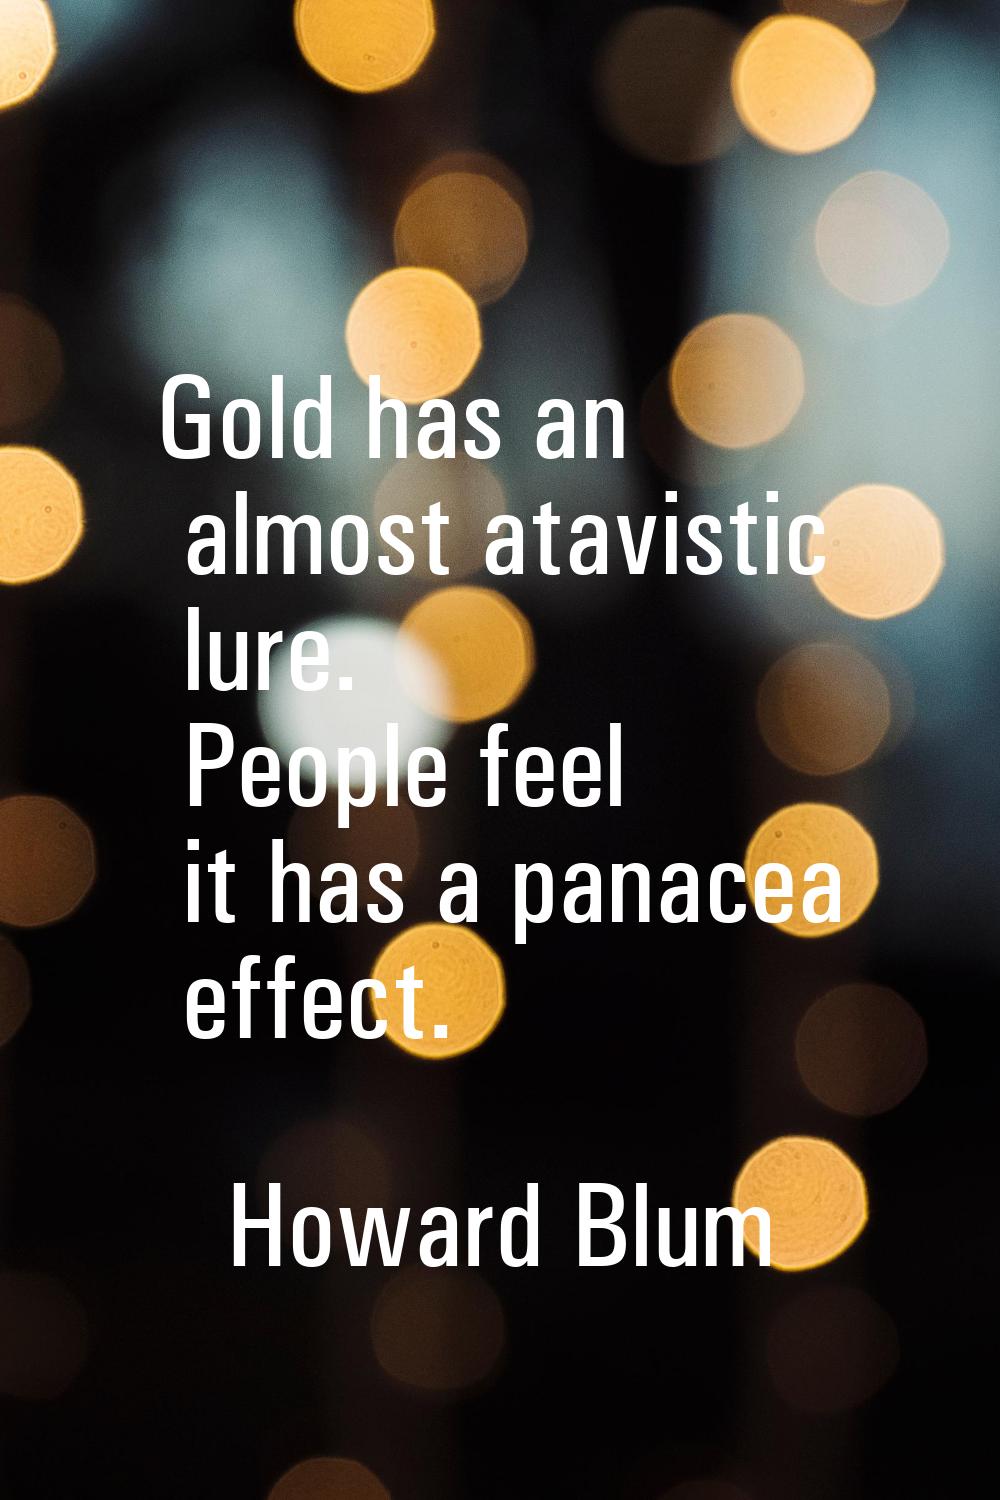 Gold has an almost atavistic lure. People feel it has a panacea effect.